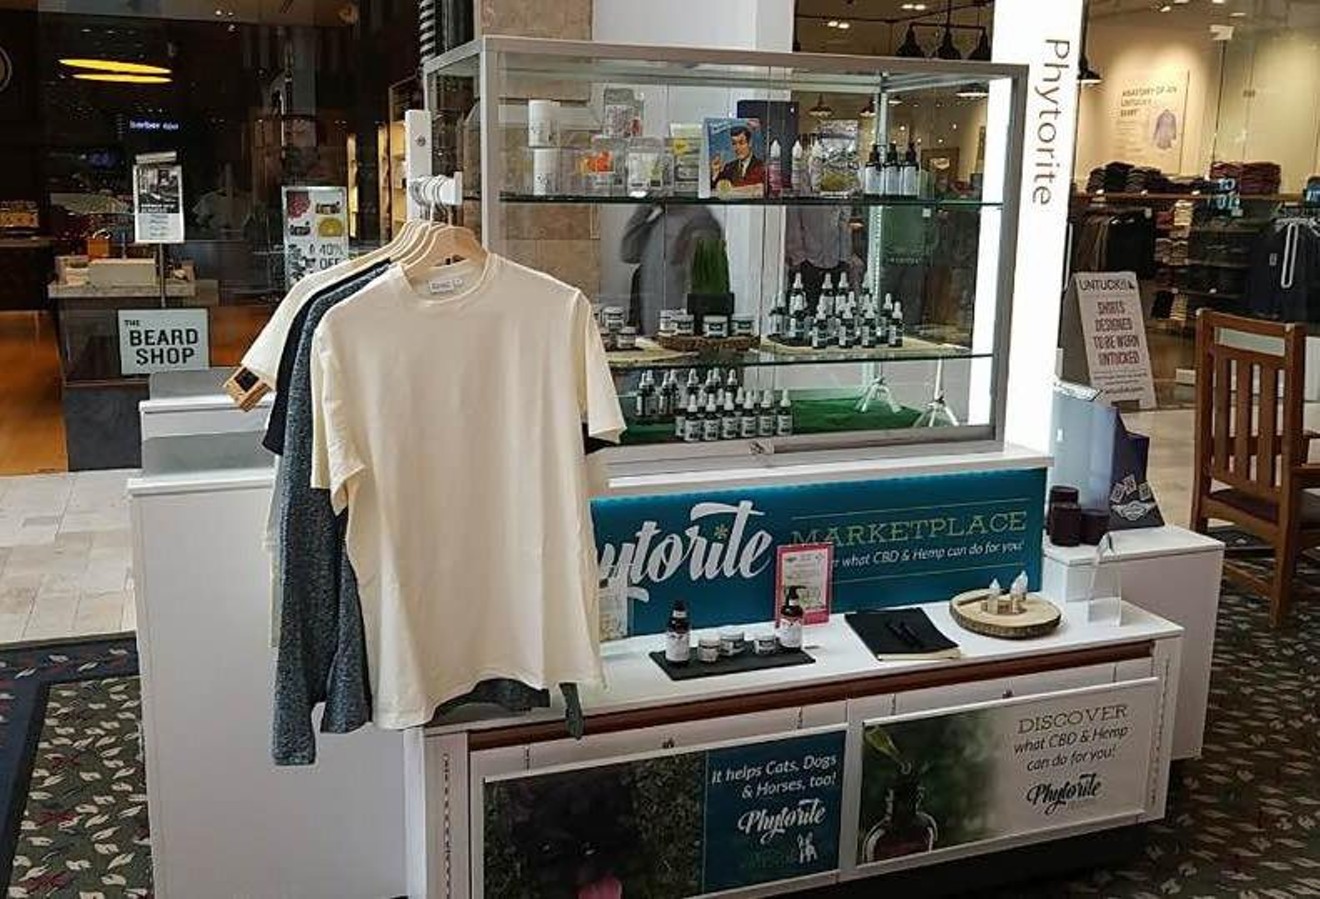 Phytorite opened its first location as a kiosk in Lone Tree at Park Meadows Mall in February.